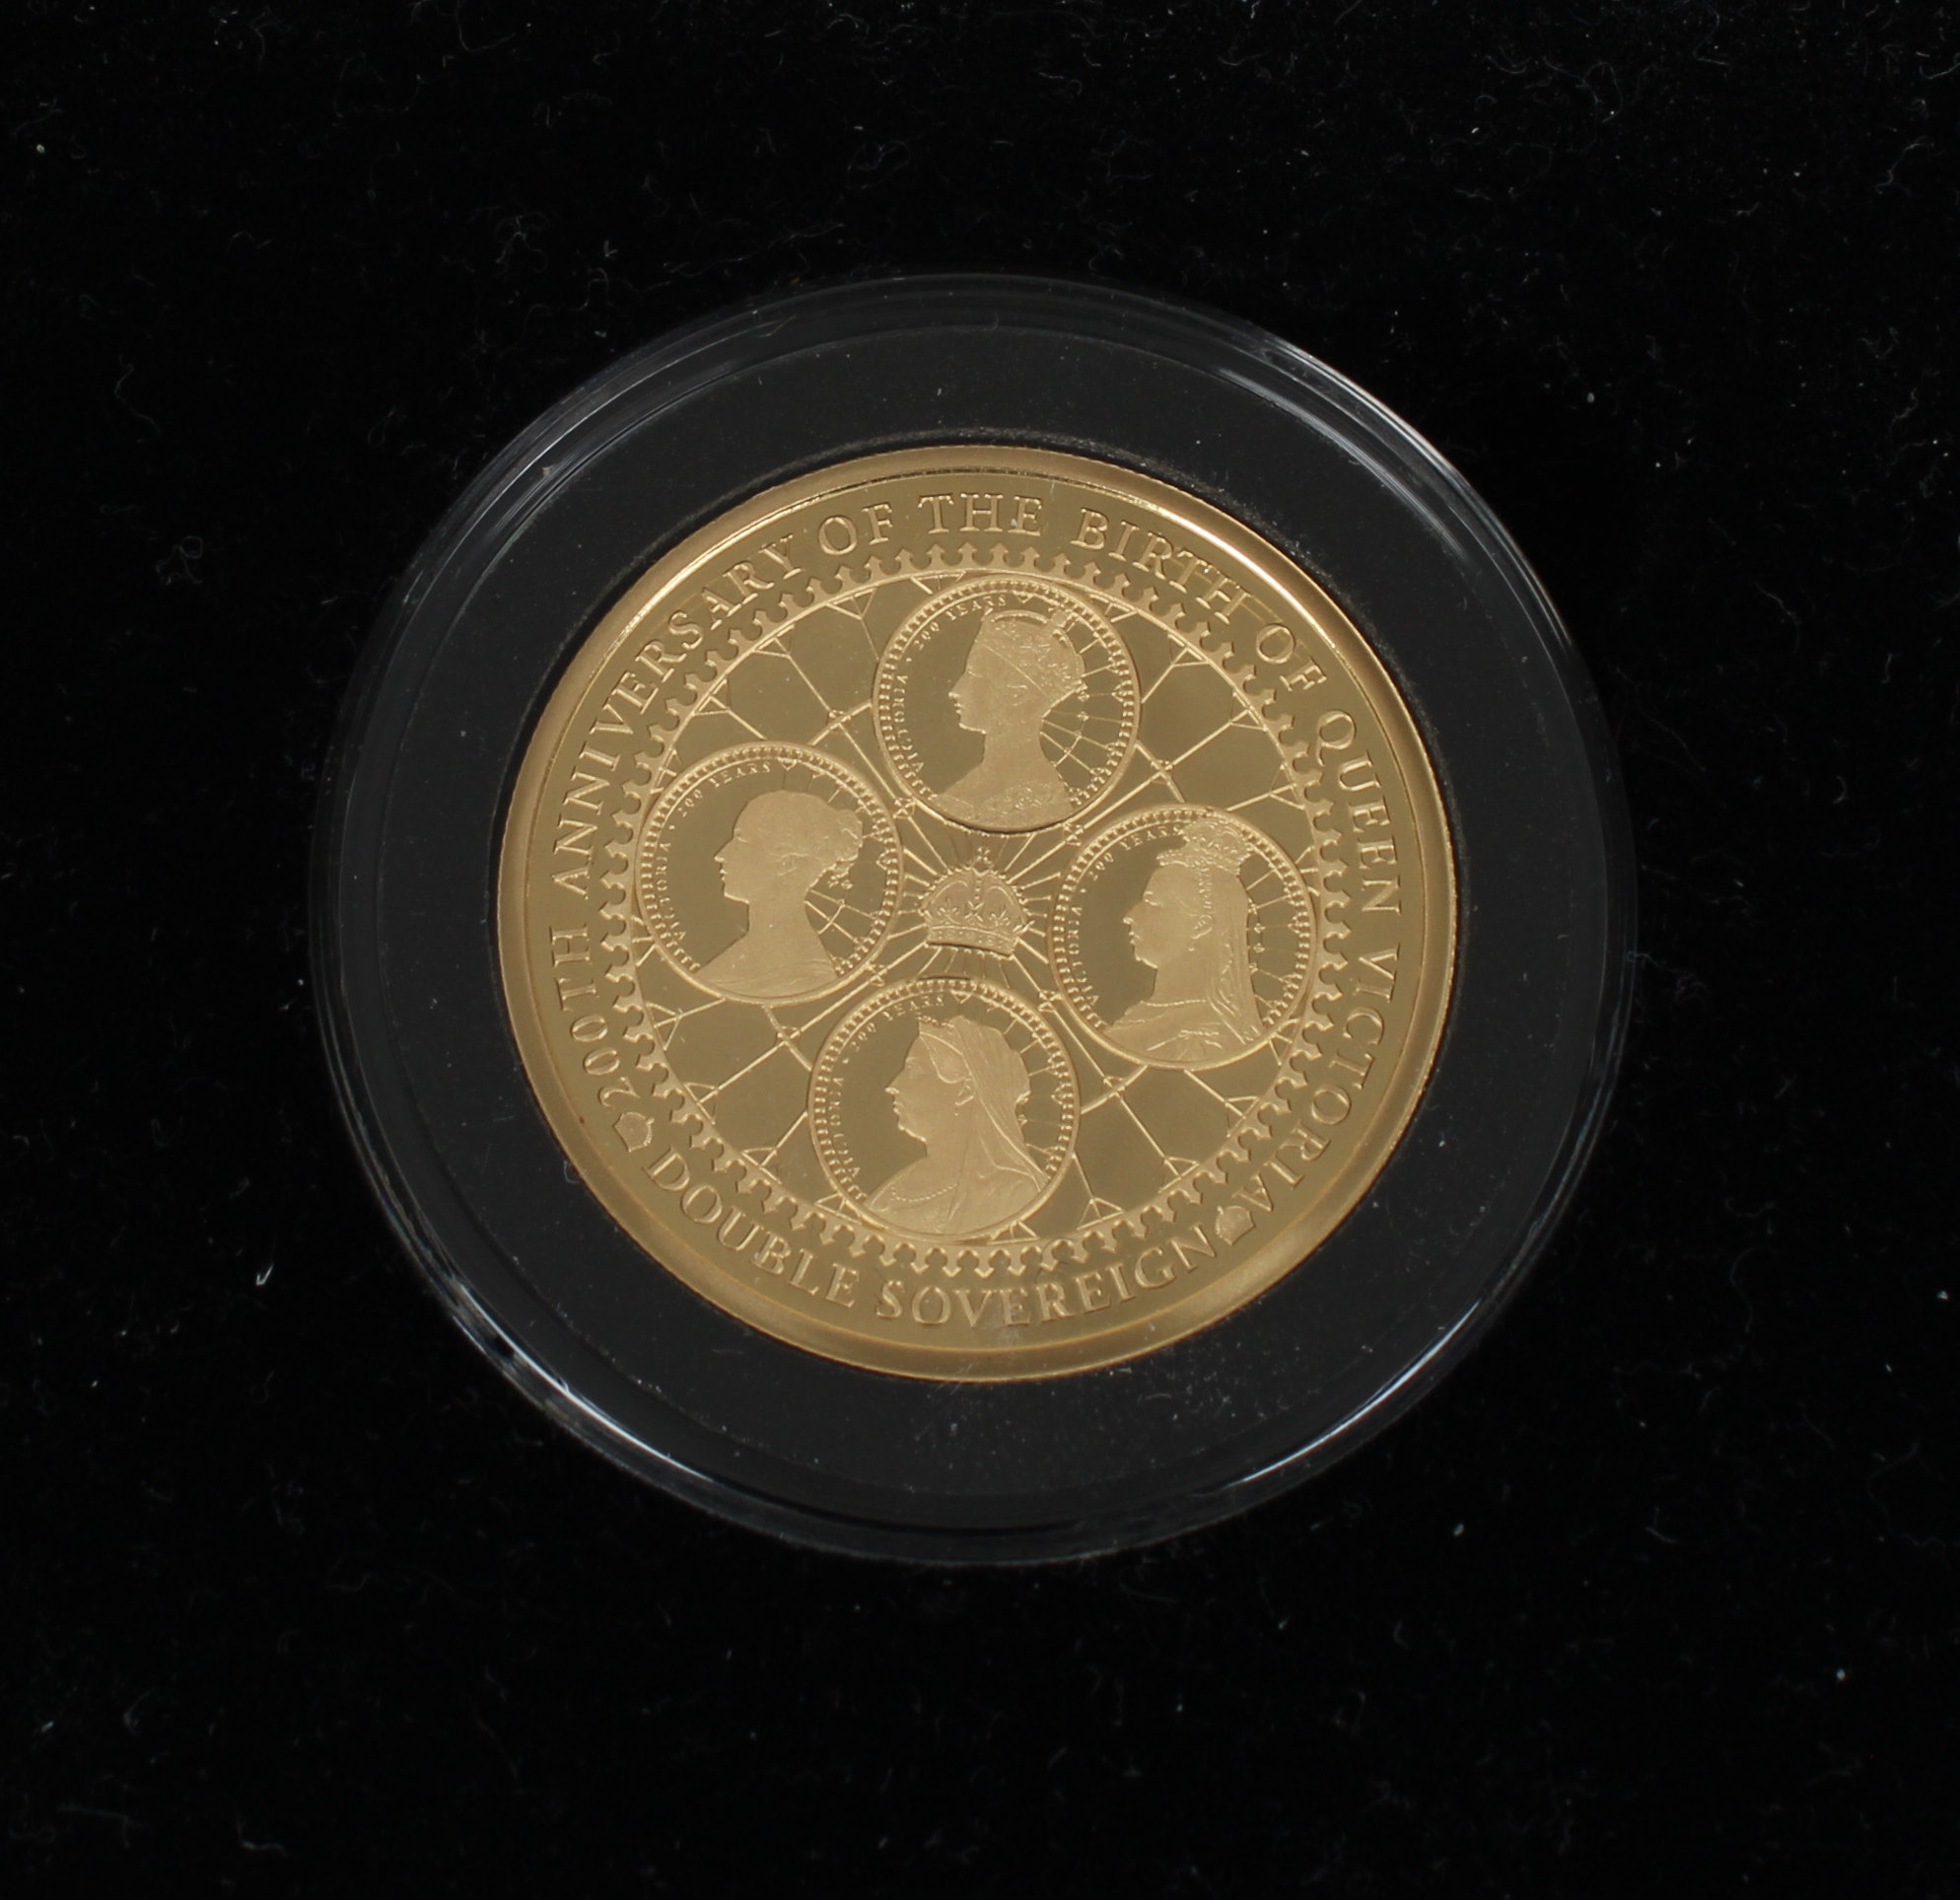 A 2019 Queen Victoria 200th Anniversary Gold Proof Double Sovereign